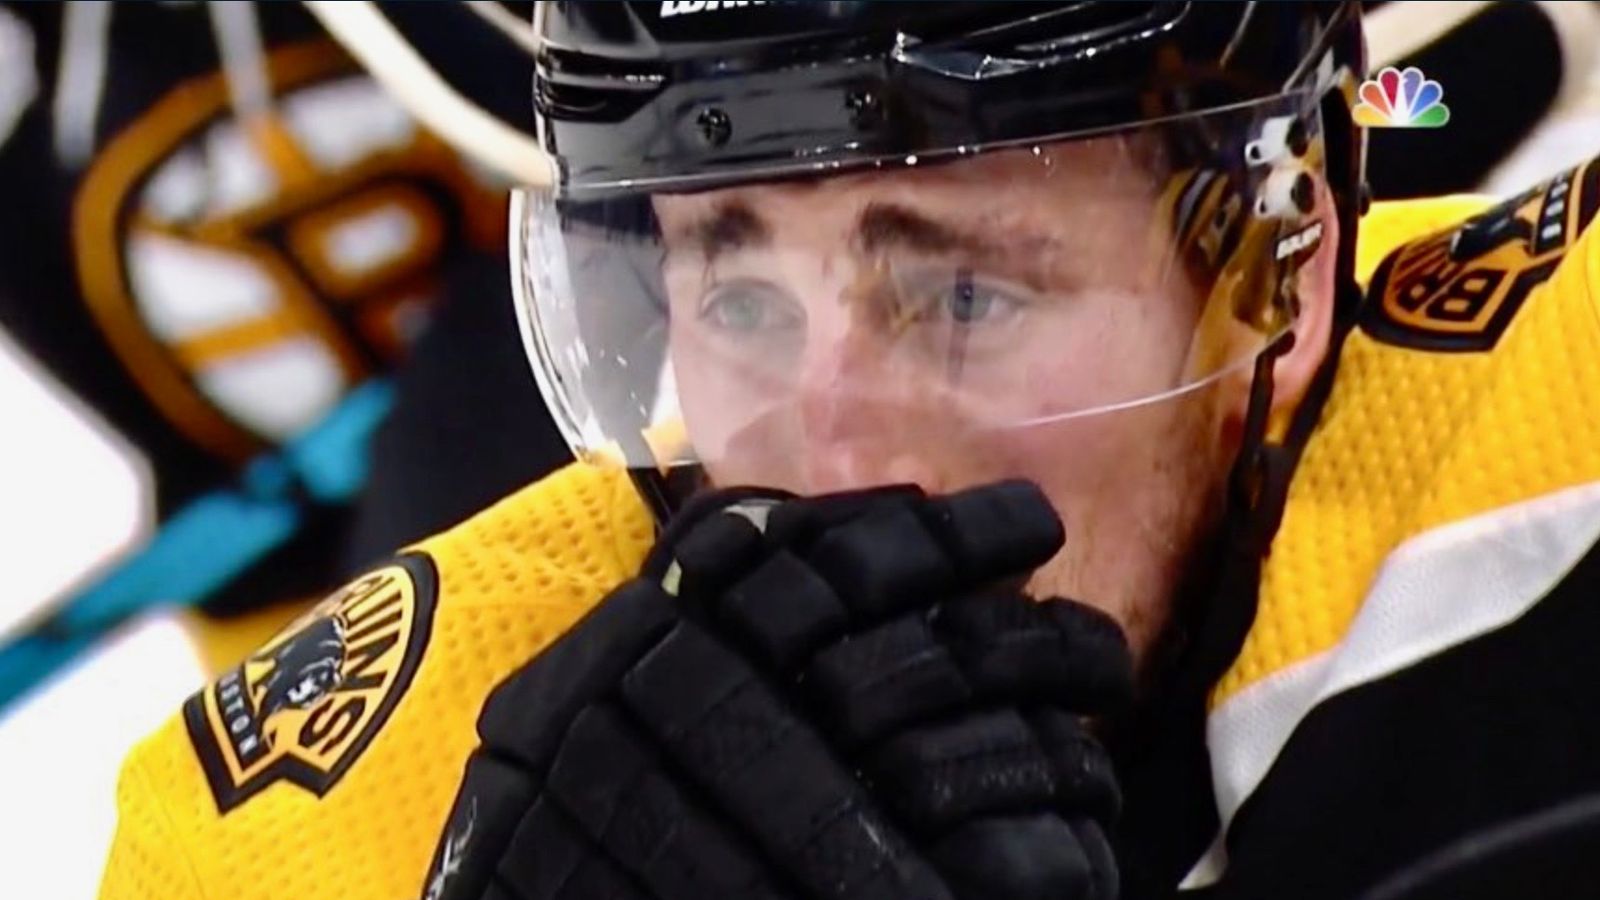 Brad Marchand Licking Everyone is the Height of NHL Stupidity